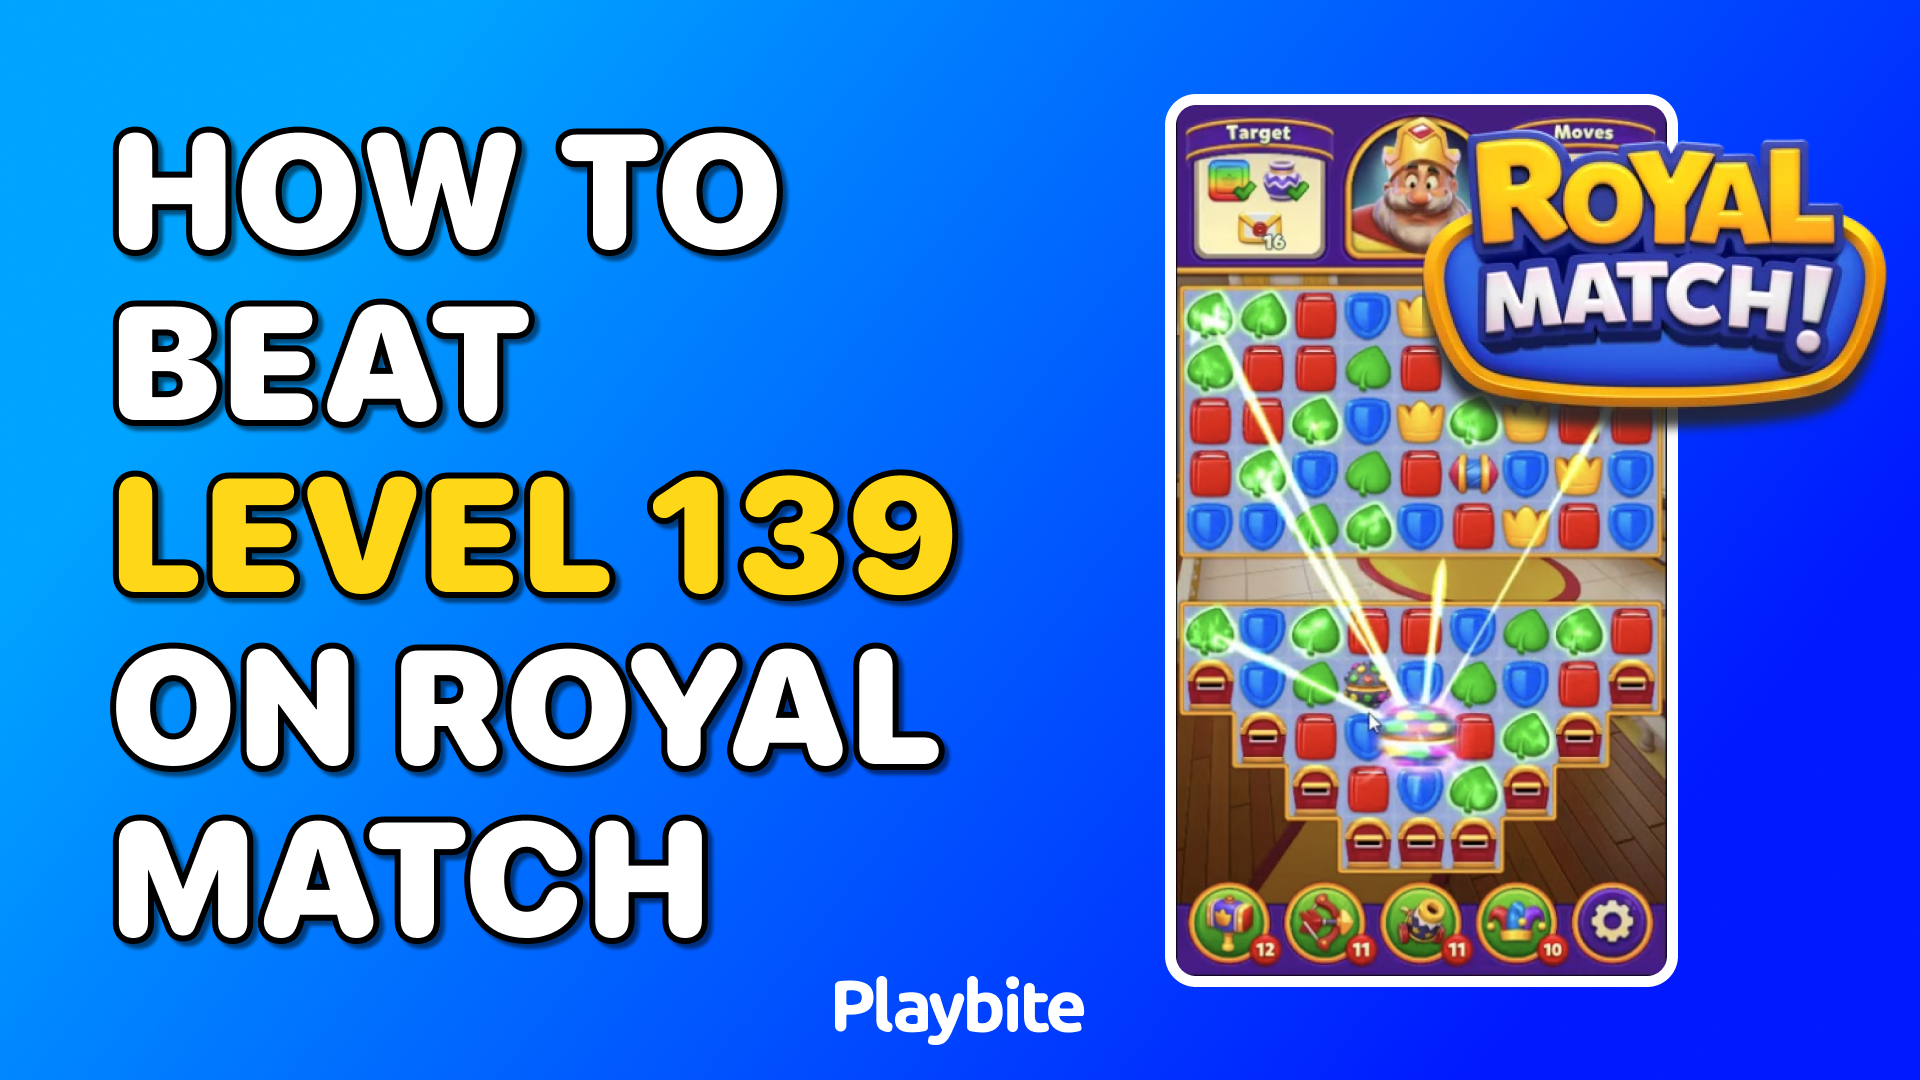 How to Beat Level 139 on Royal Match